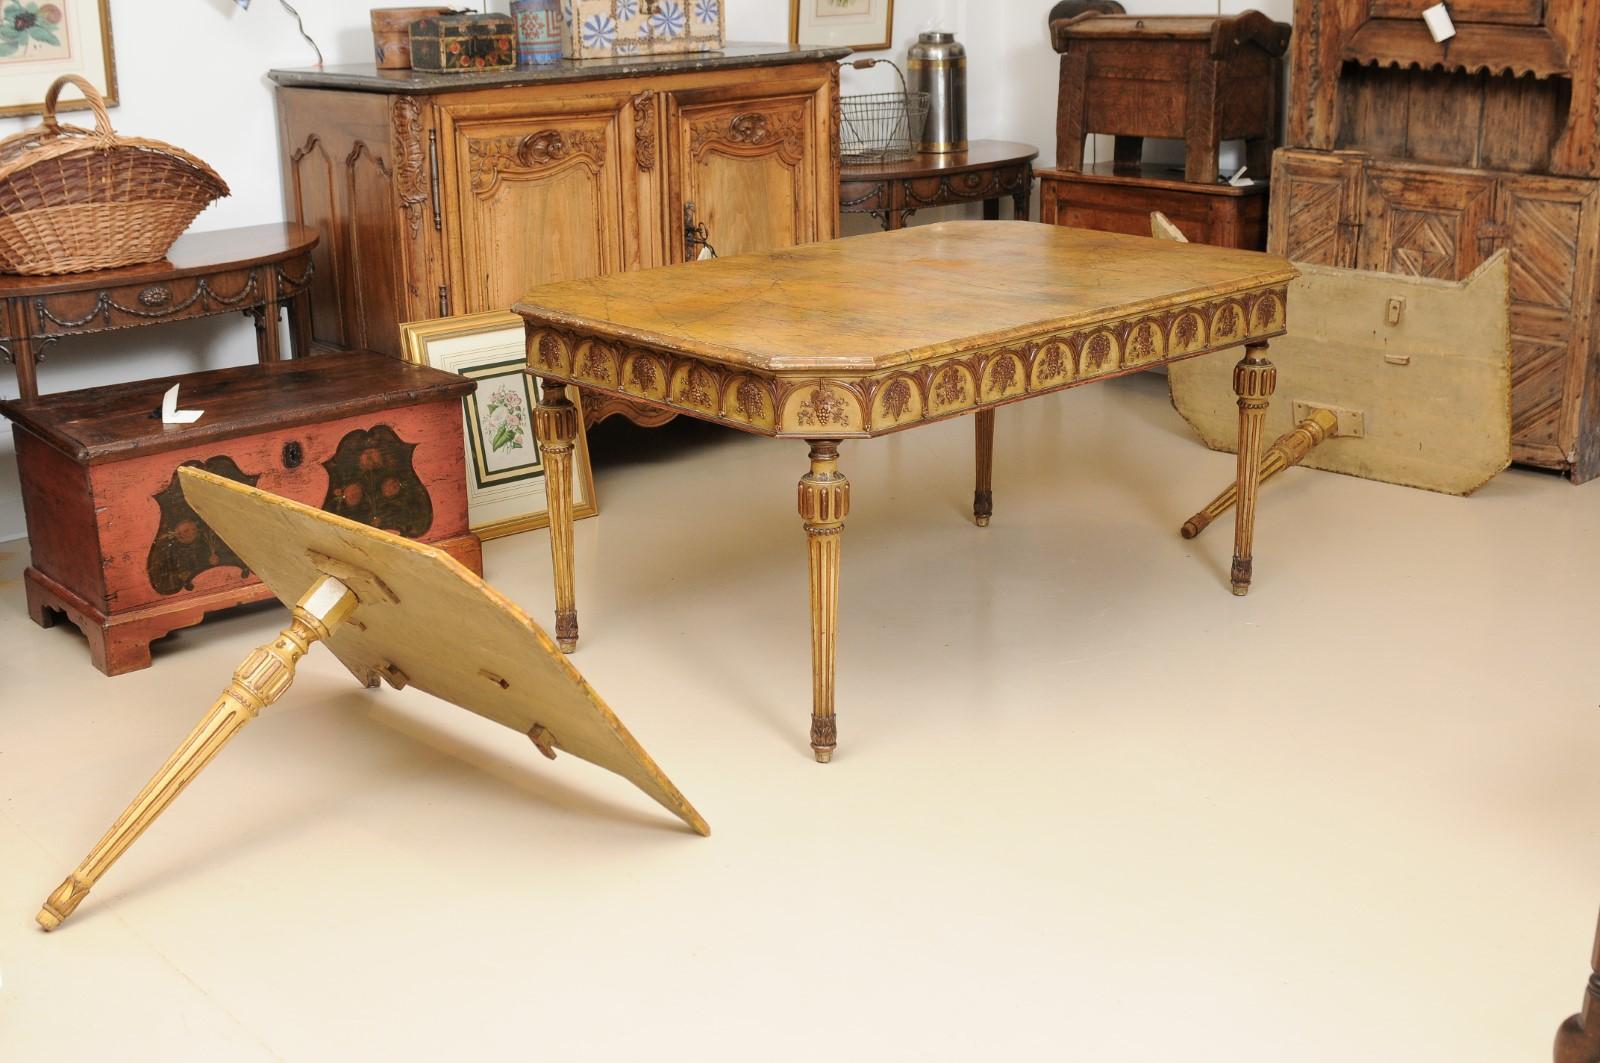 20th Century Italian Neapolitan Style Painted Dining Table with Faux Marble Top For Sale